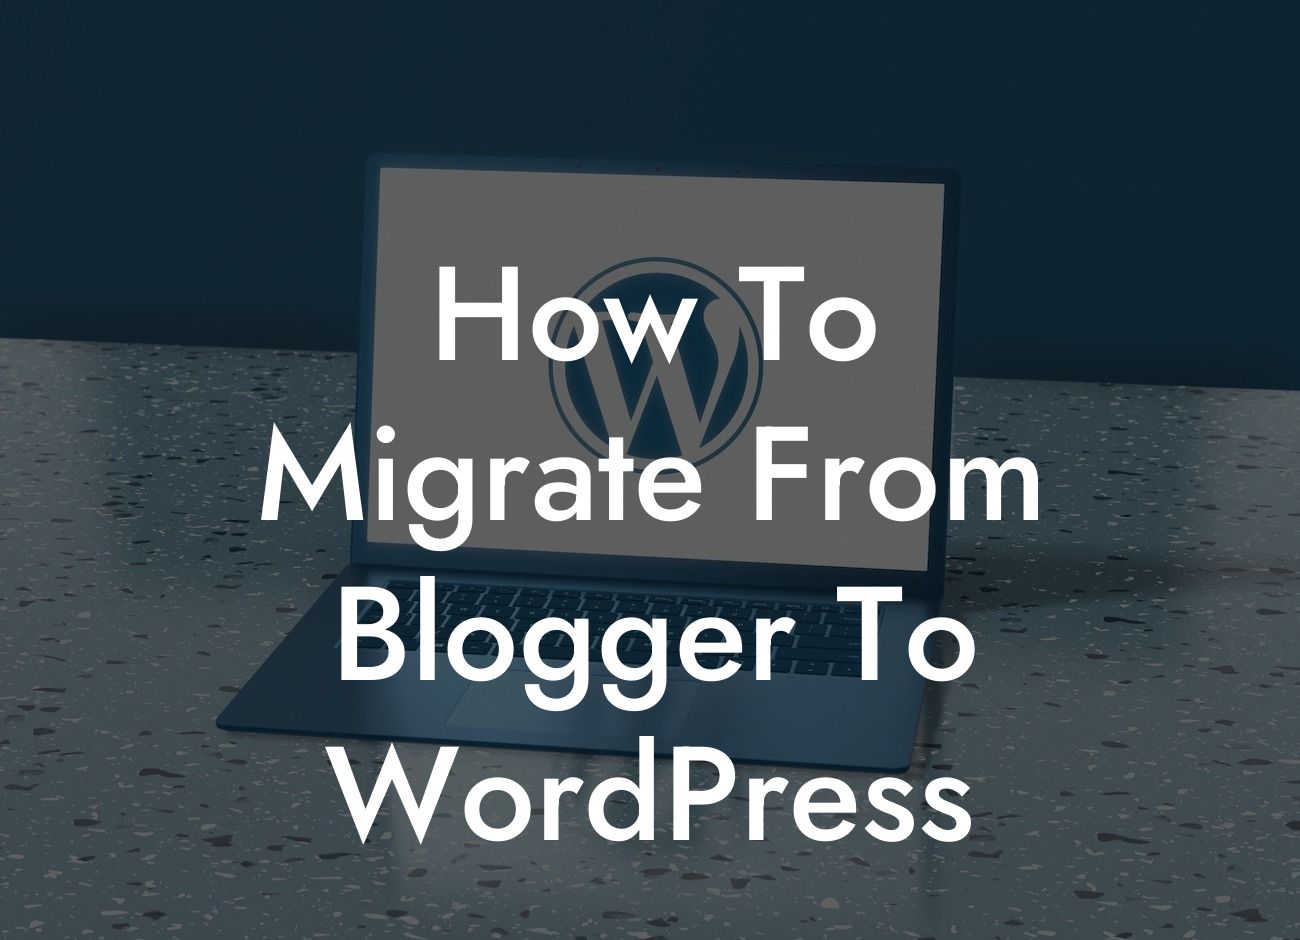 How To Migrate From Blogger To WordPress